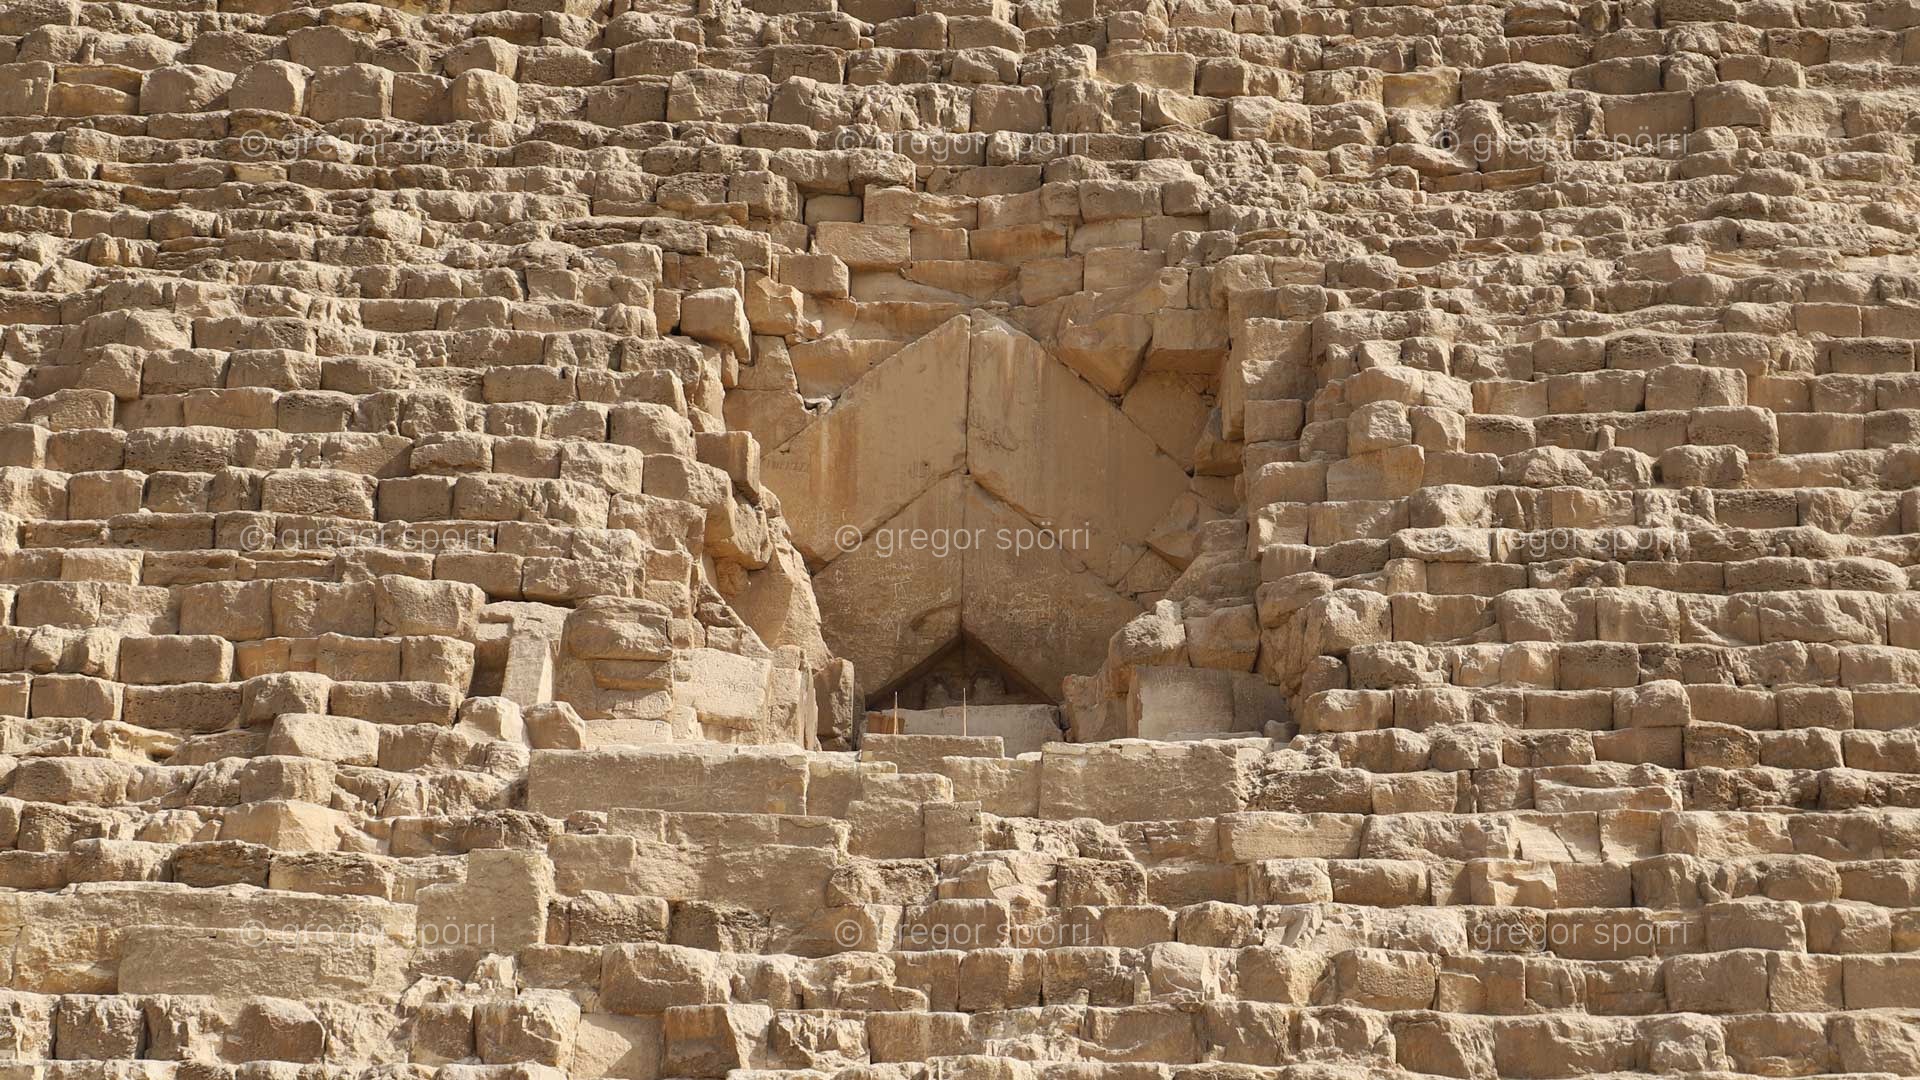 The original entrance to the Great Pyramid.